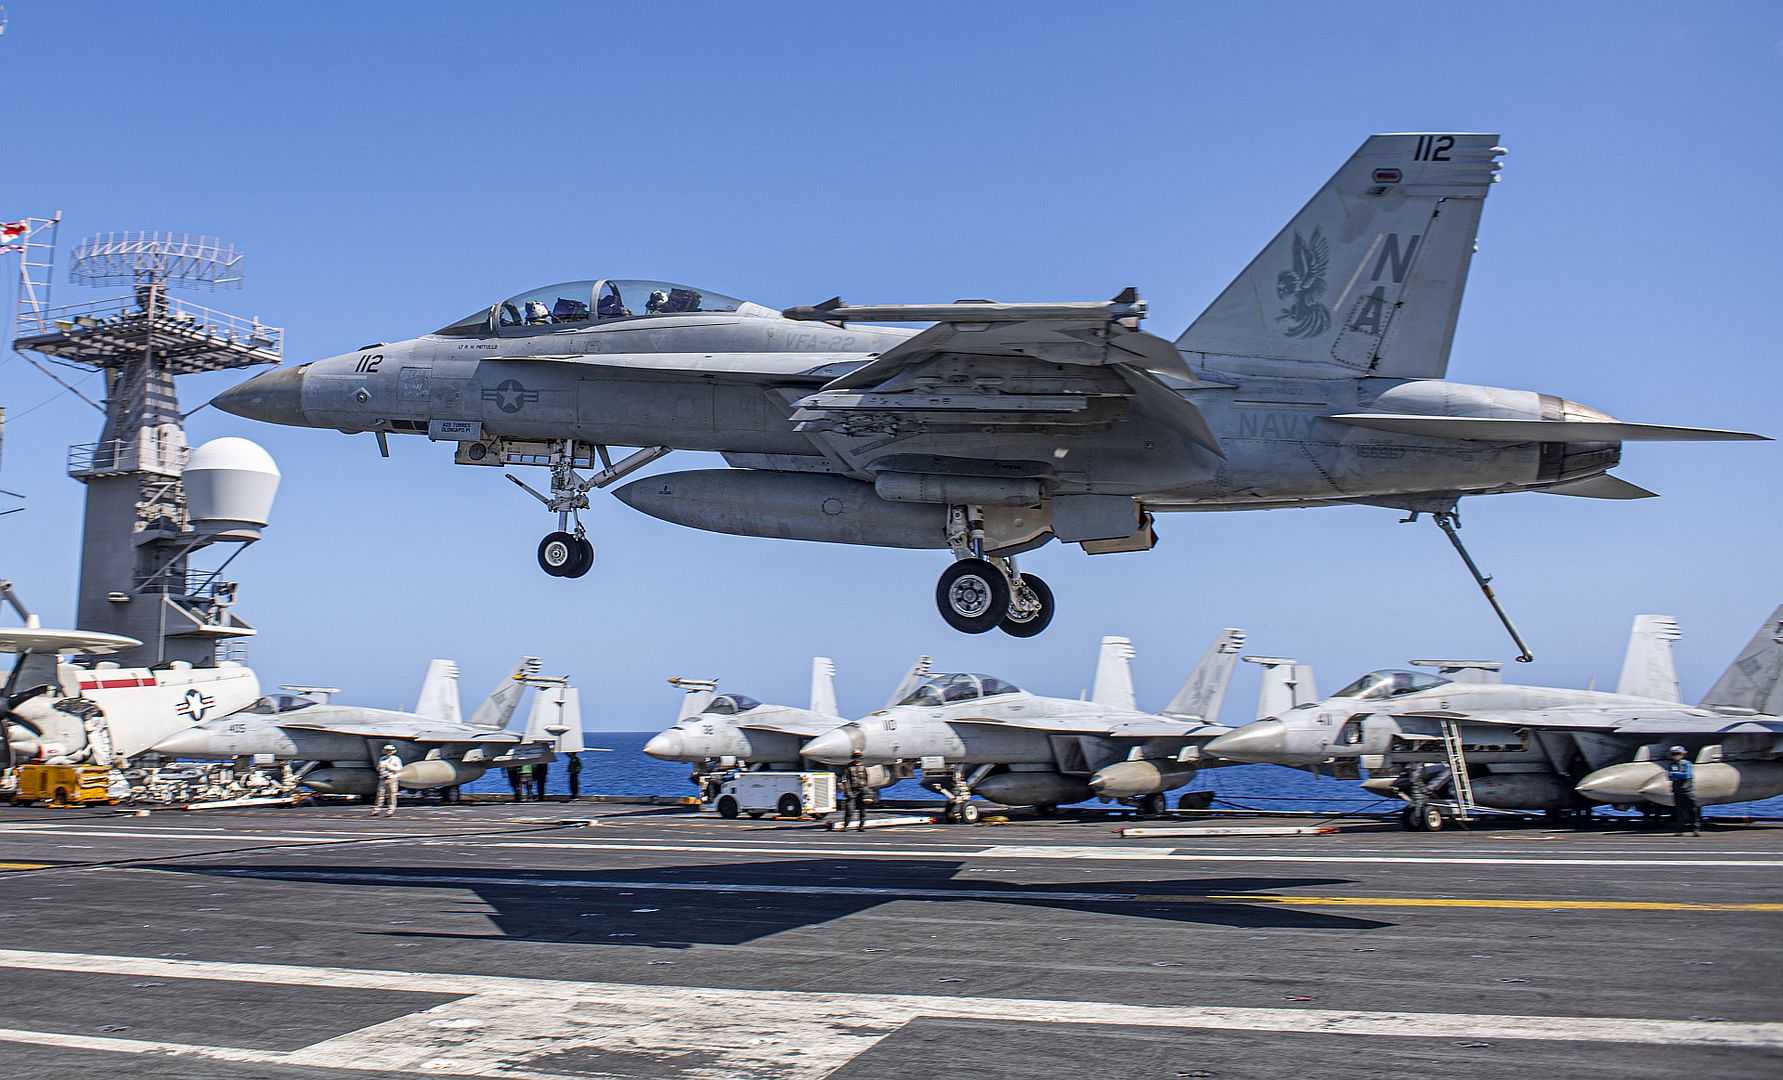  22 Makes An Arrested Landing On The Flight Deck Of The Aircraft Carrier USS Nimitz PSqa4sypPgyQGMwgde5pTr